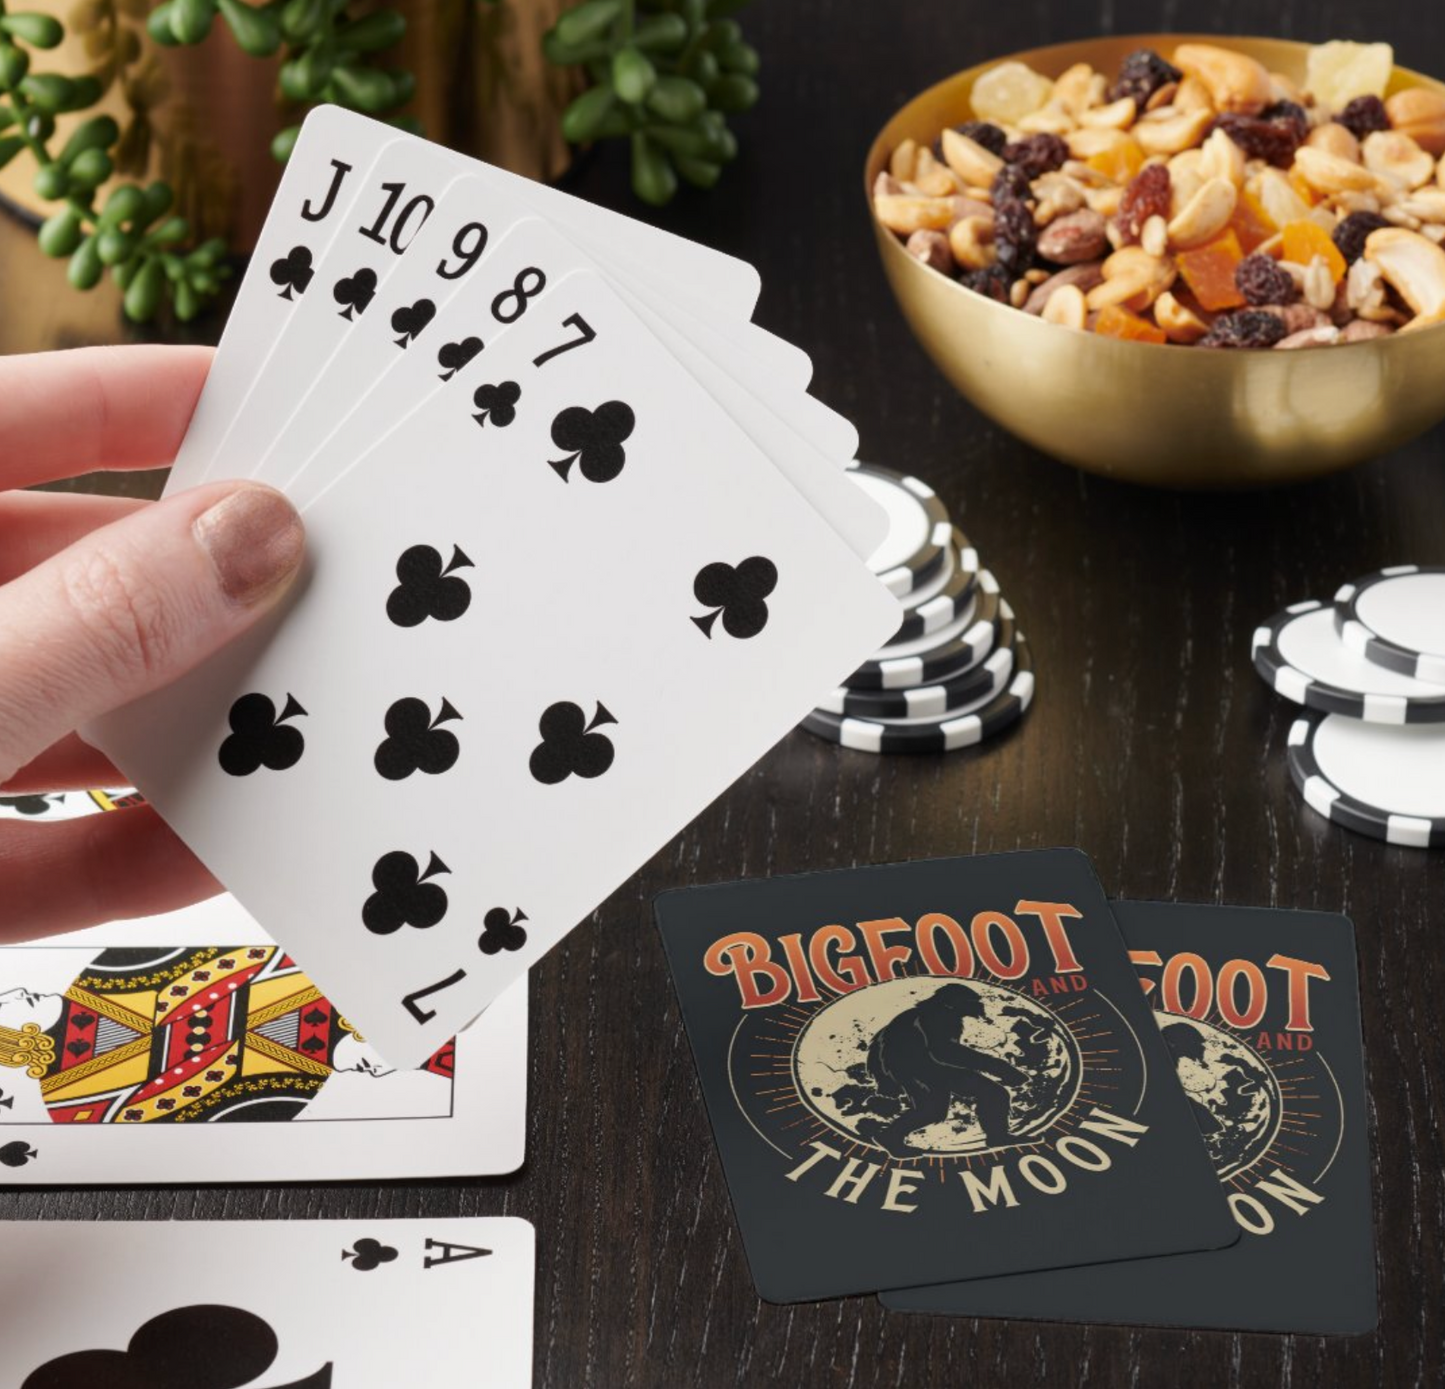 Bigfoot And The Moon playing cards!